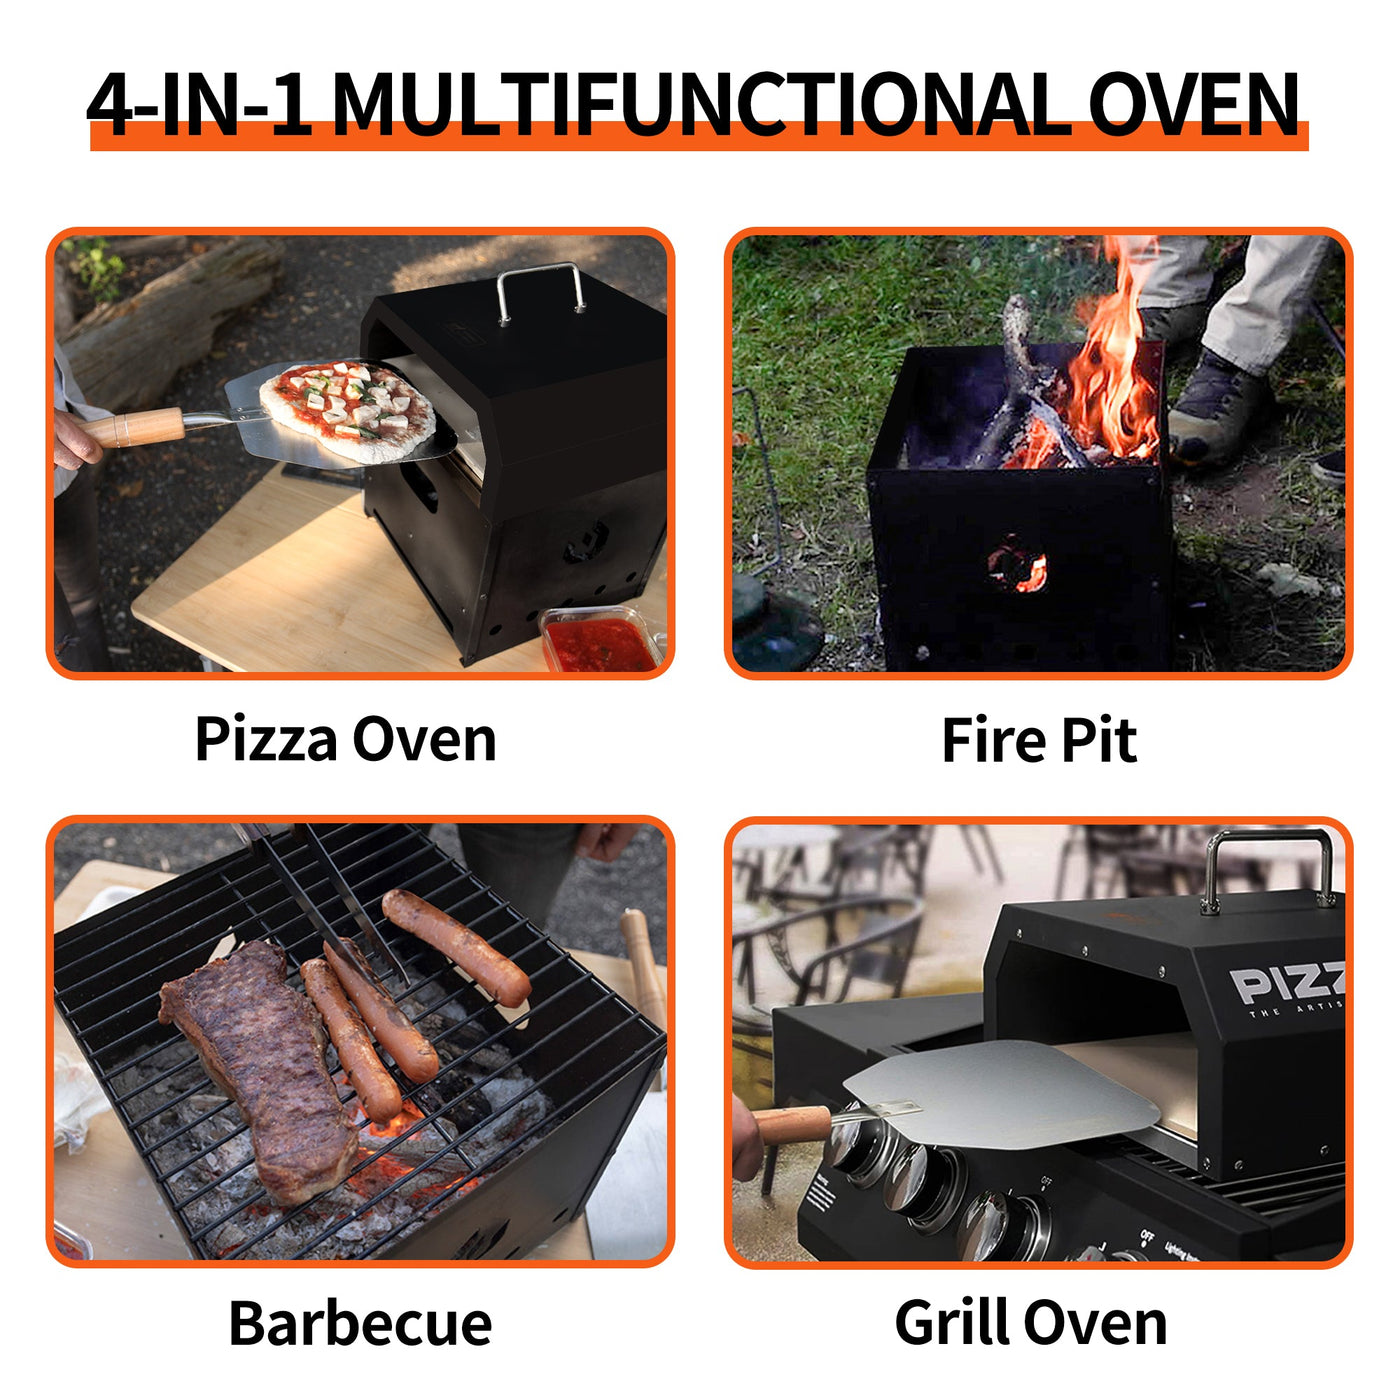 Pizzello Gusto - 4 in 1 Outdoor Pizza Oven - Pizzello#size_12-inch